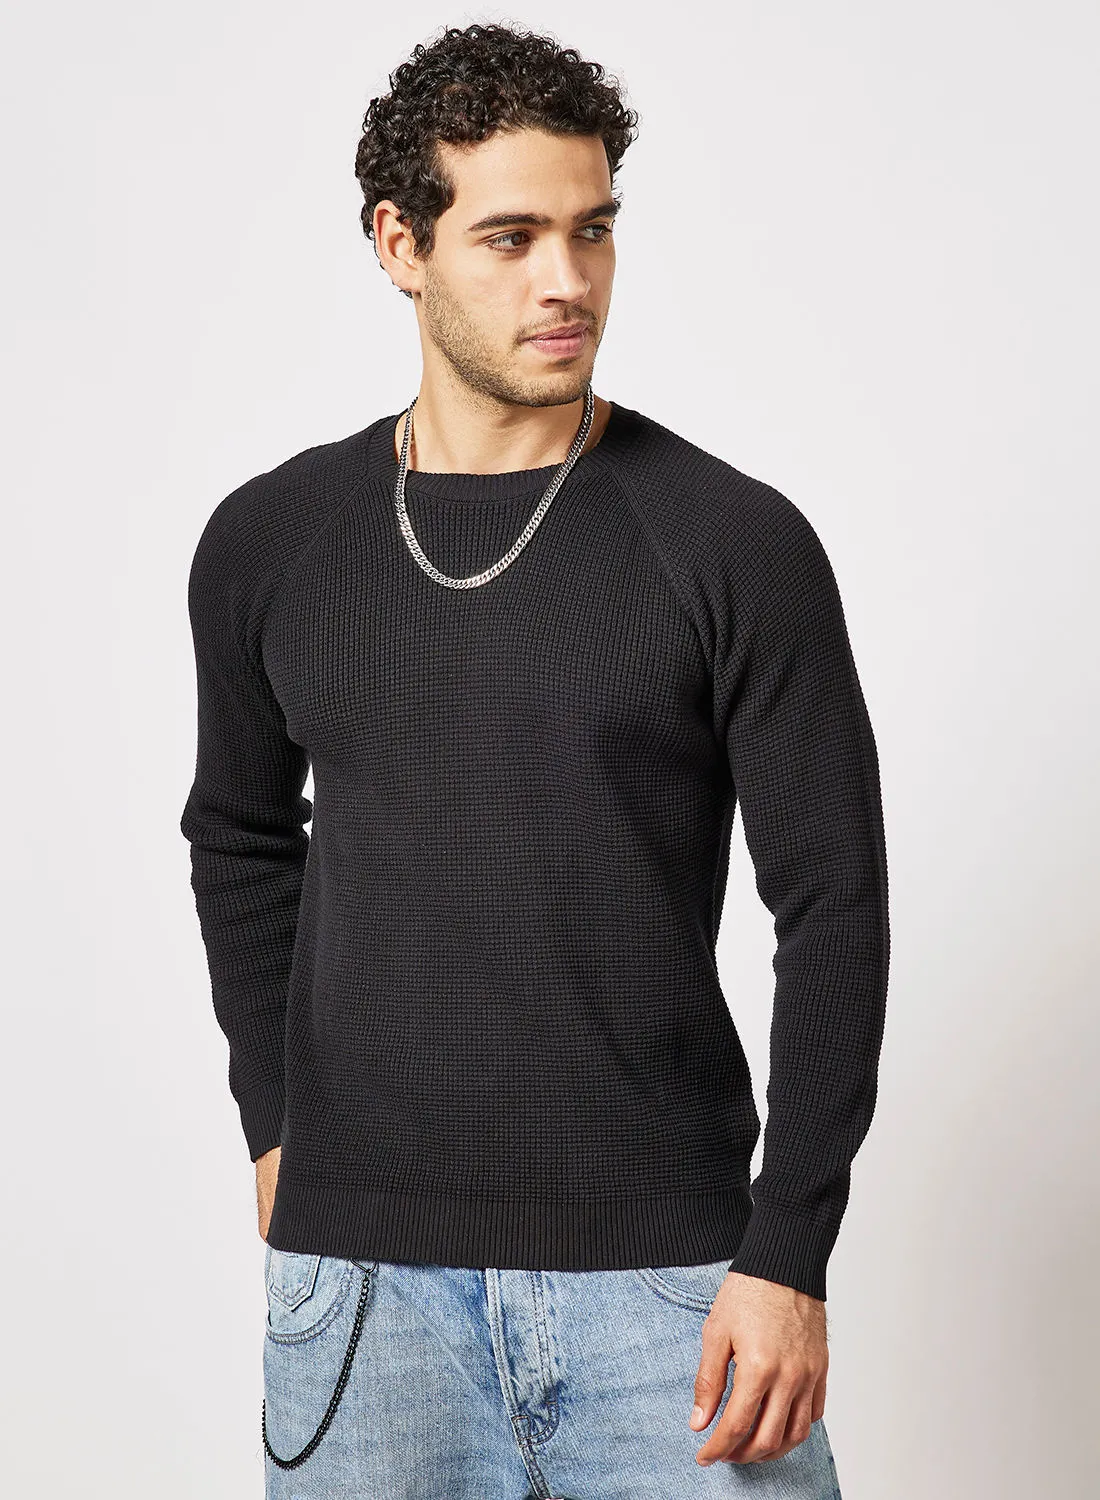 Red Tape Casual Men's Long Sleeve Cotton Sweater Raven Black